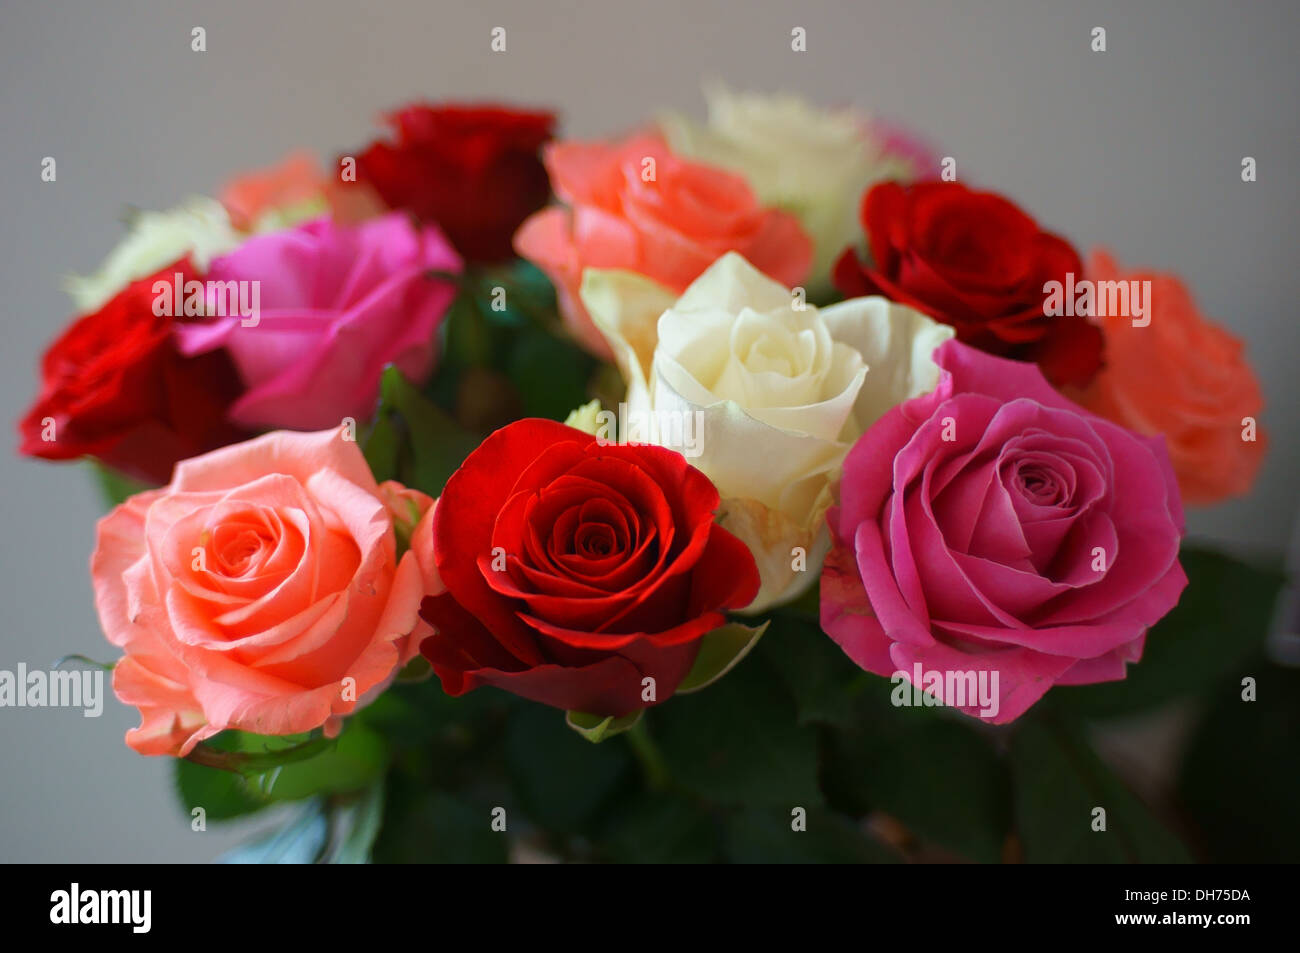 Bunch of pink red white and purple roses Stock Photo